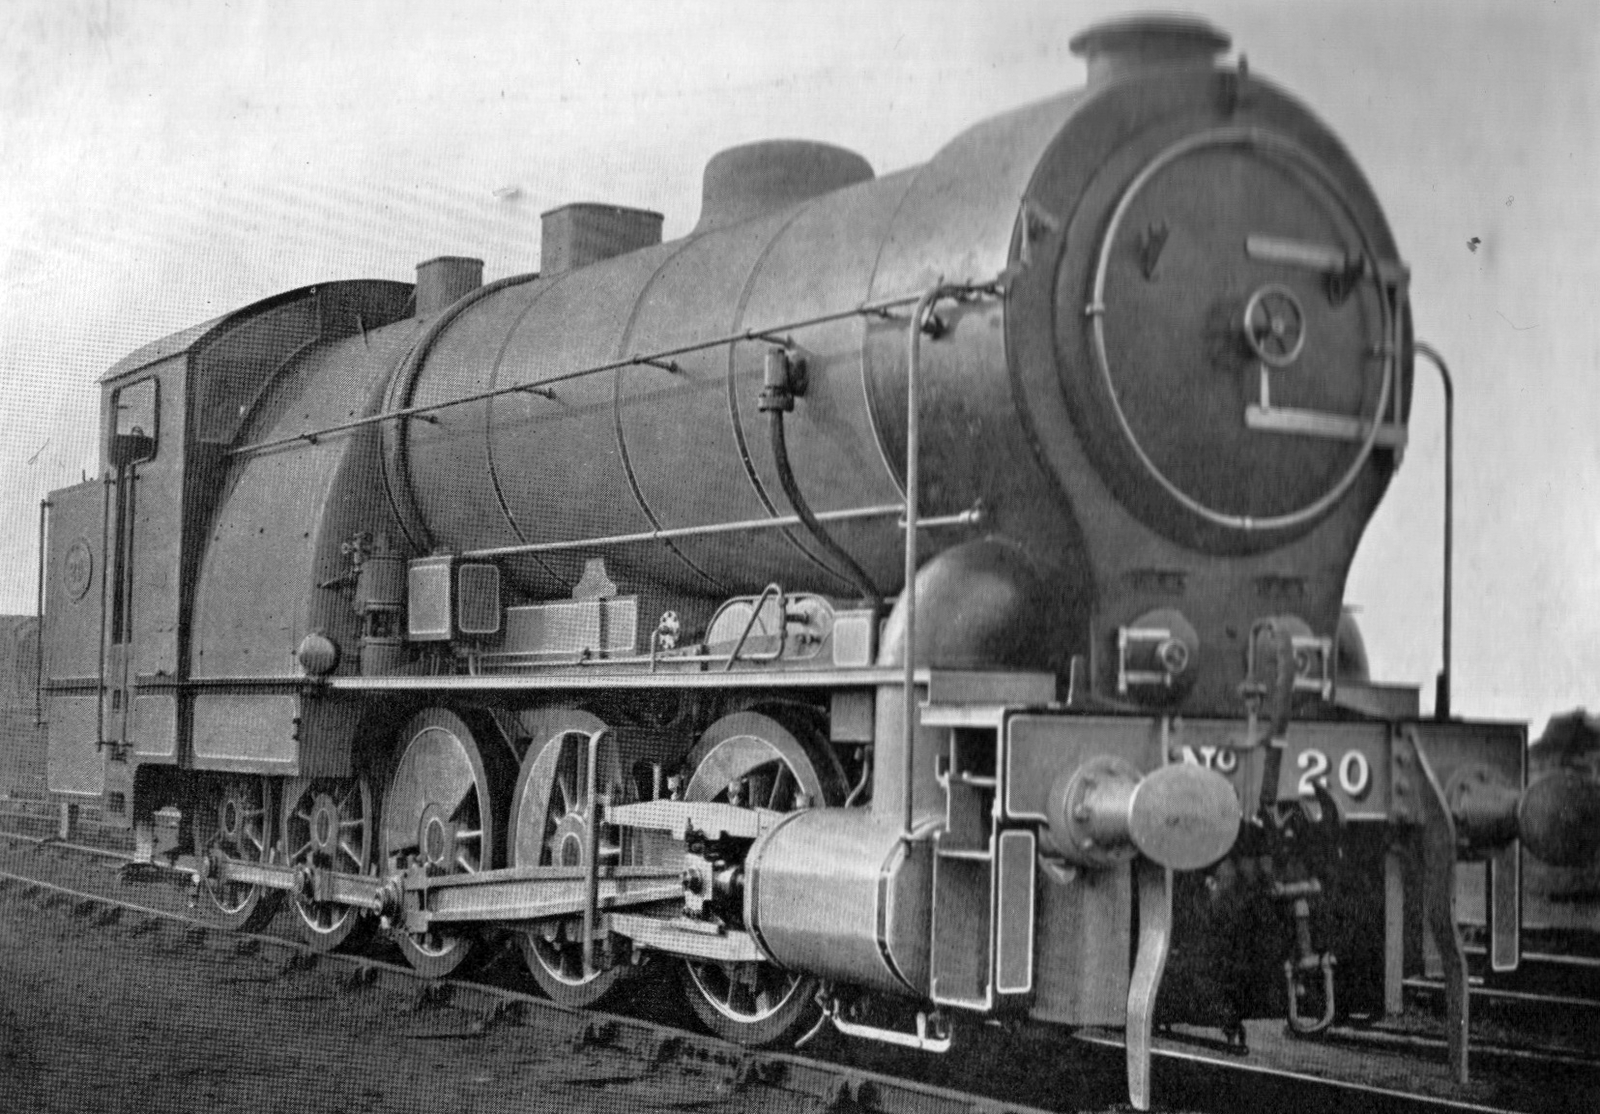 Front view with the Wootten firebox clearly visible